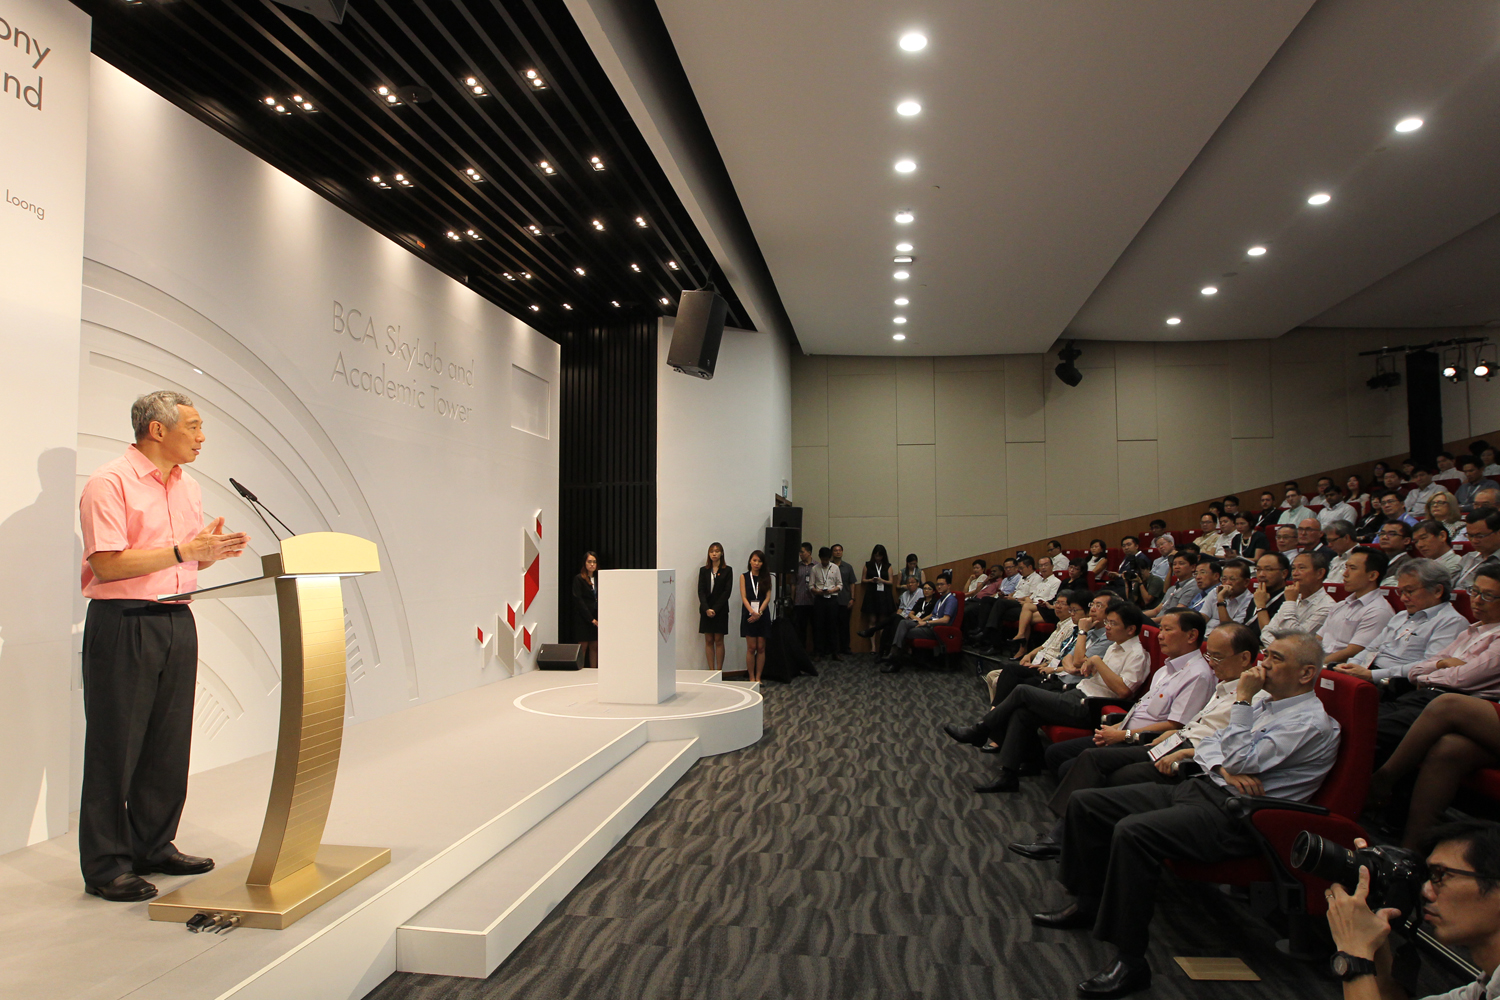 PM Lee Hsien Loong at opening of BCA Skylab and Academic Tower on 20 Jul 2016 (MCI Photo by Chwee)